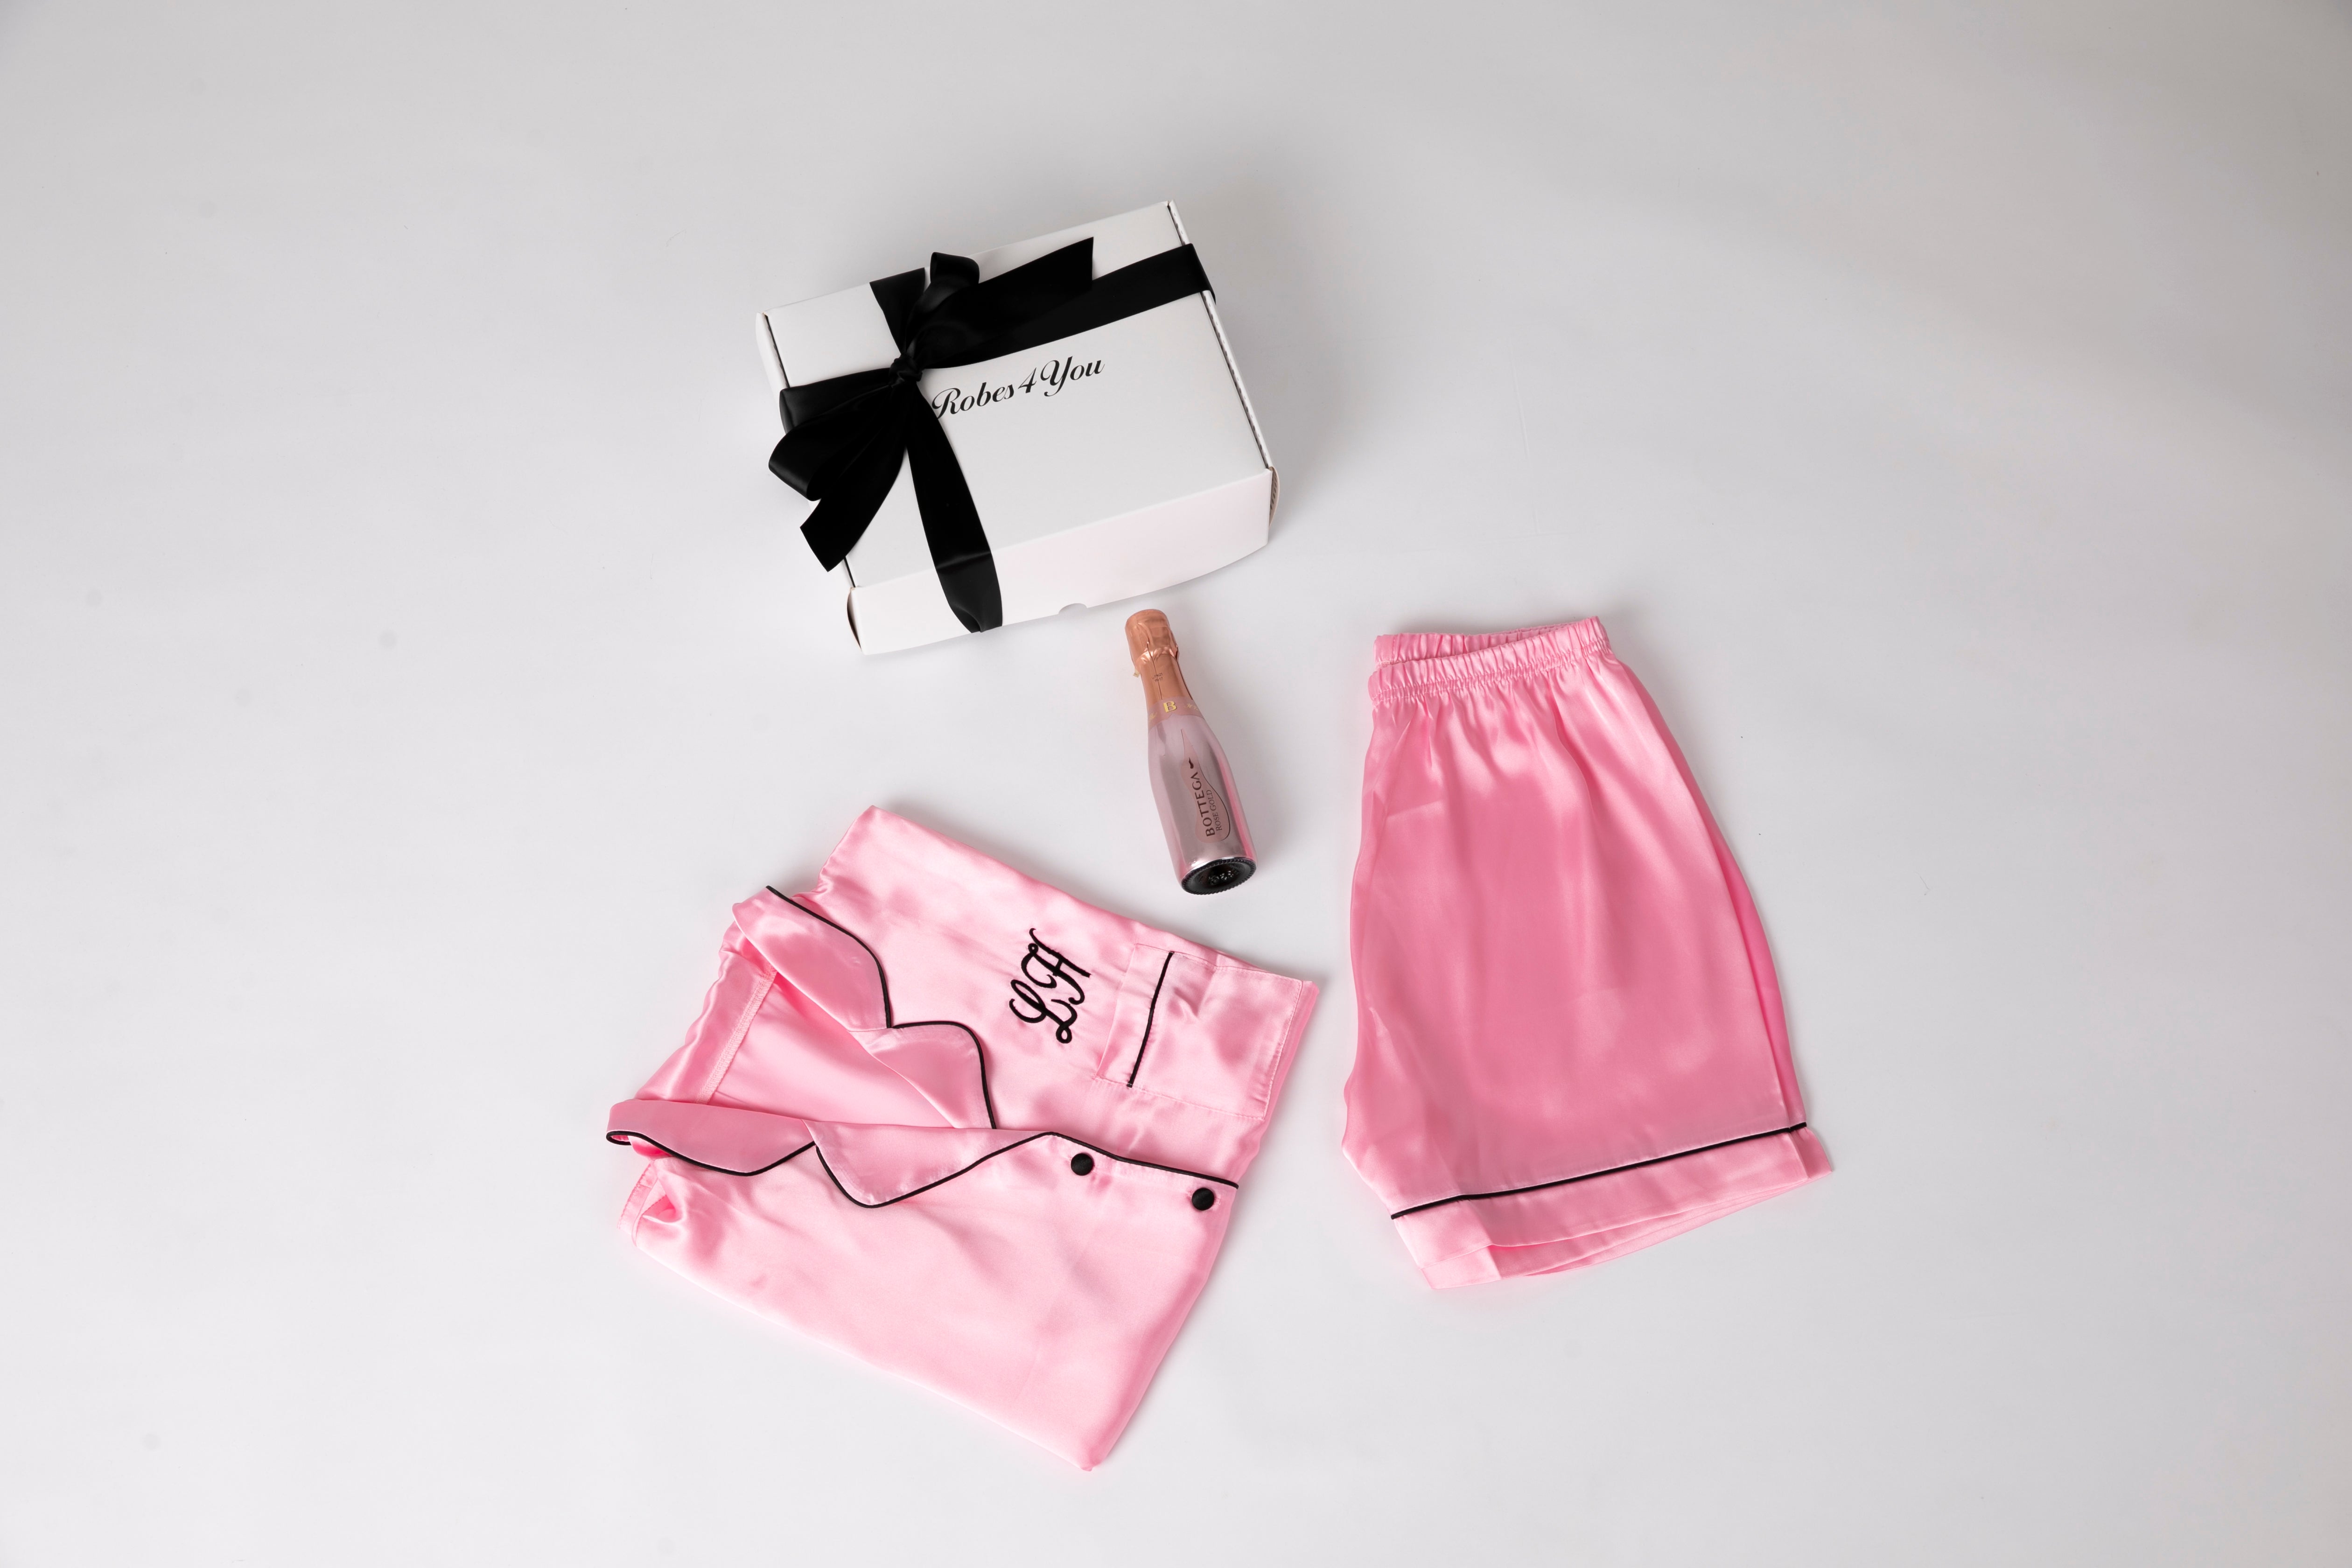 Mini PJs Hamper-Satin Short Pyjamas with Snippet of Prosecco Presented in a gift box with ribbon